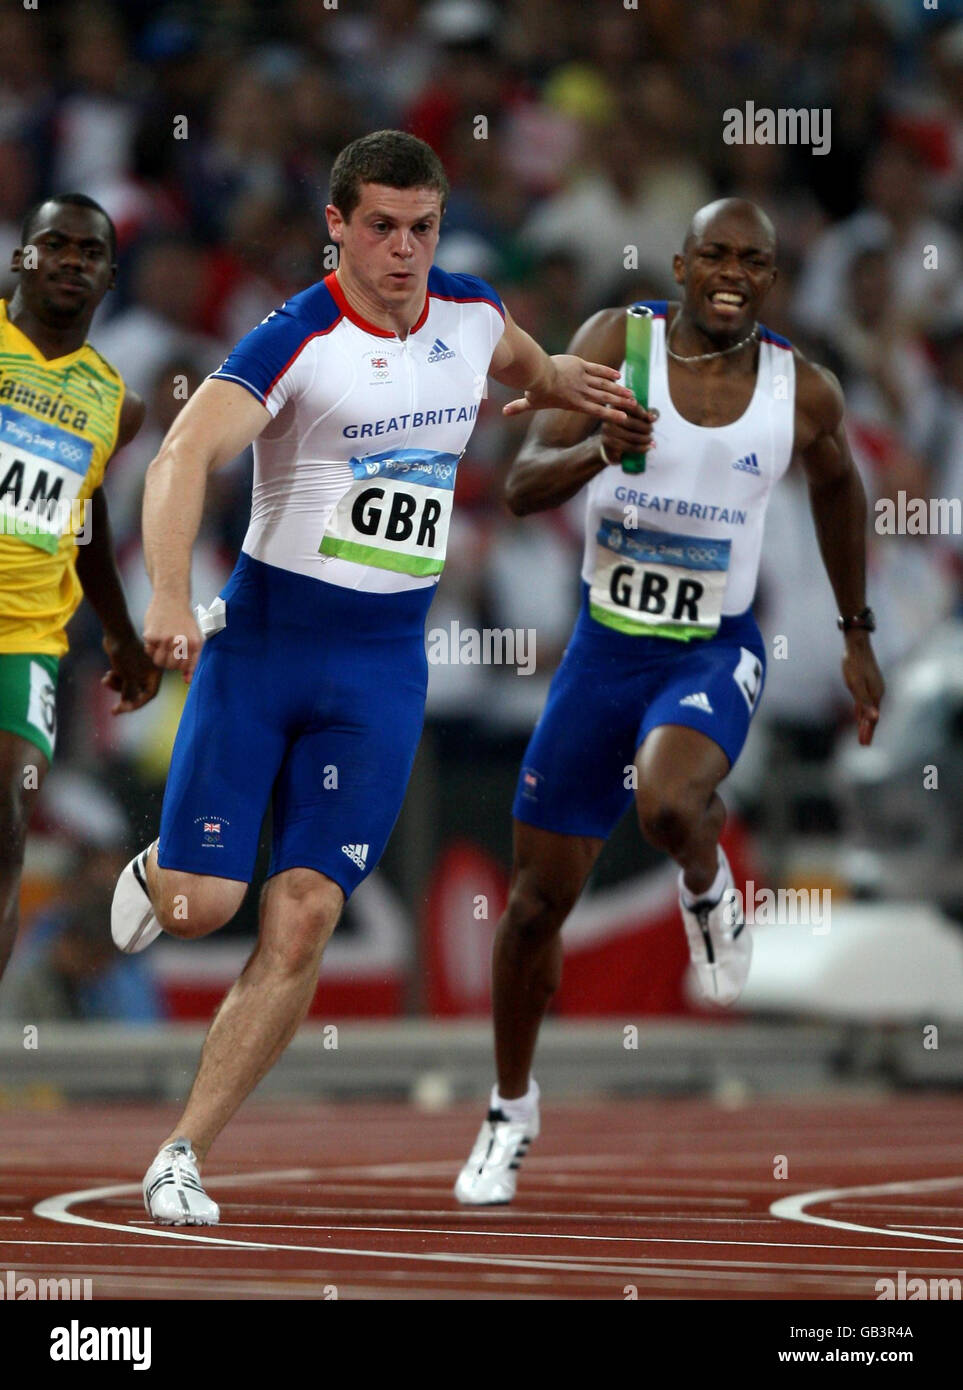 Great Britain's Craig Pickering (left) steps just outside of the permitted area to receive the handover of the baton from team mate Marlon Devonish (right) leading to Great Britain's disqualification from the men's 4x100 relayl at the National Stadium in Beijing during the 2008 Beijing Olympic Games in China. Stock Photo